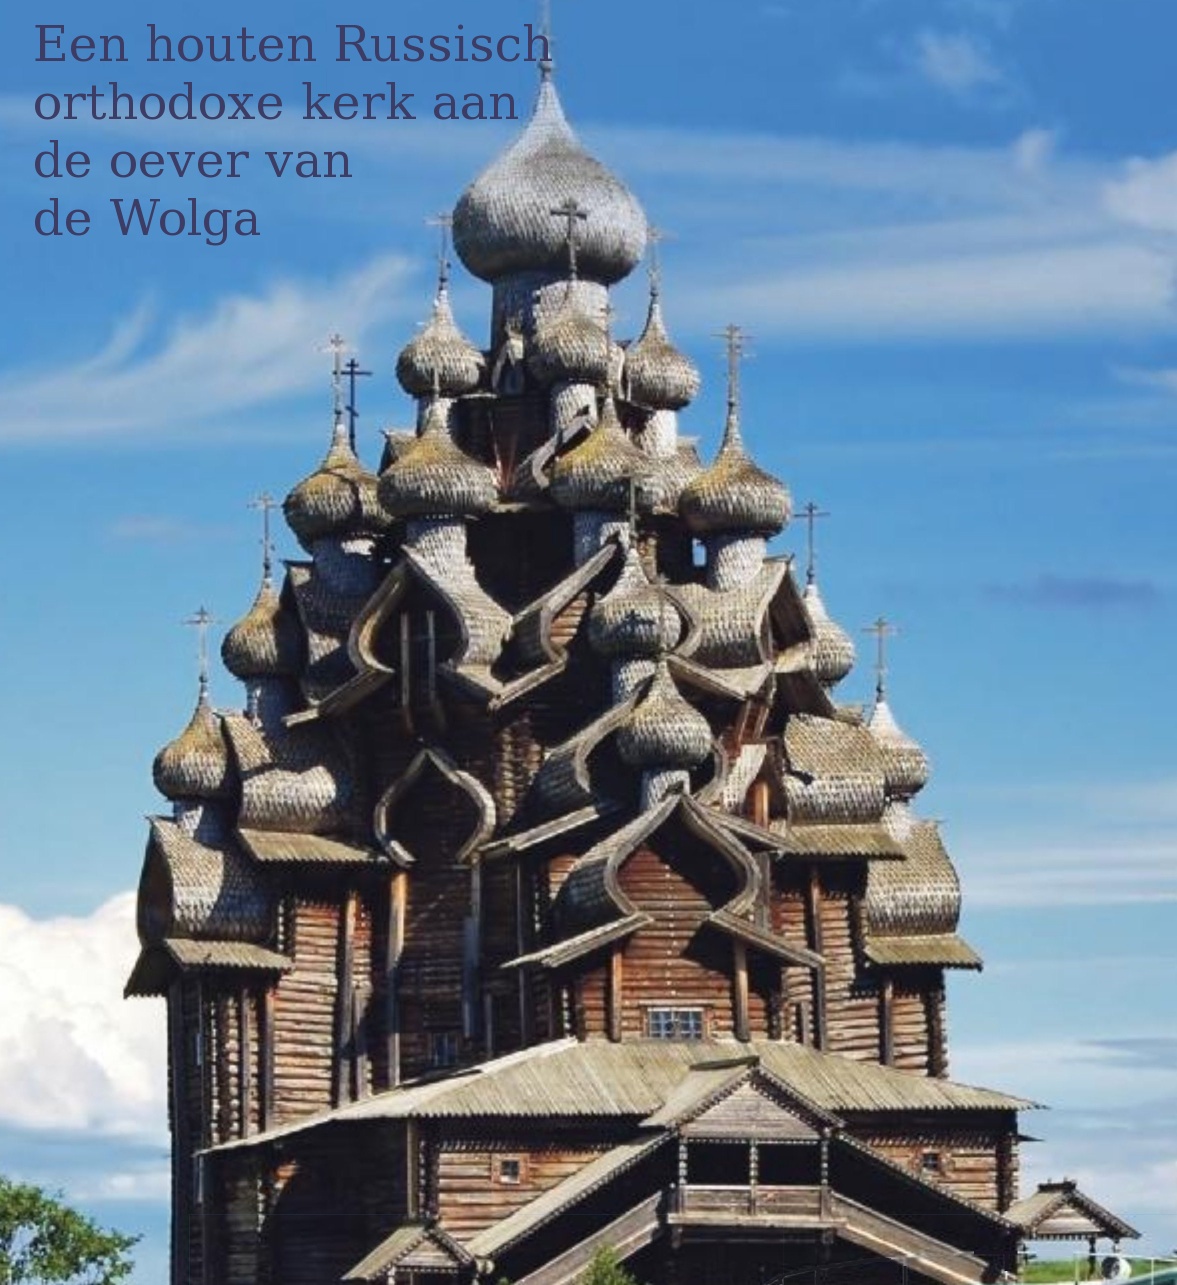 orthodox-wooden-church-on-the-Wolga-texted.jpg